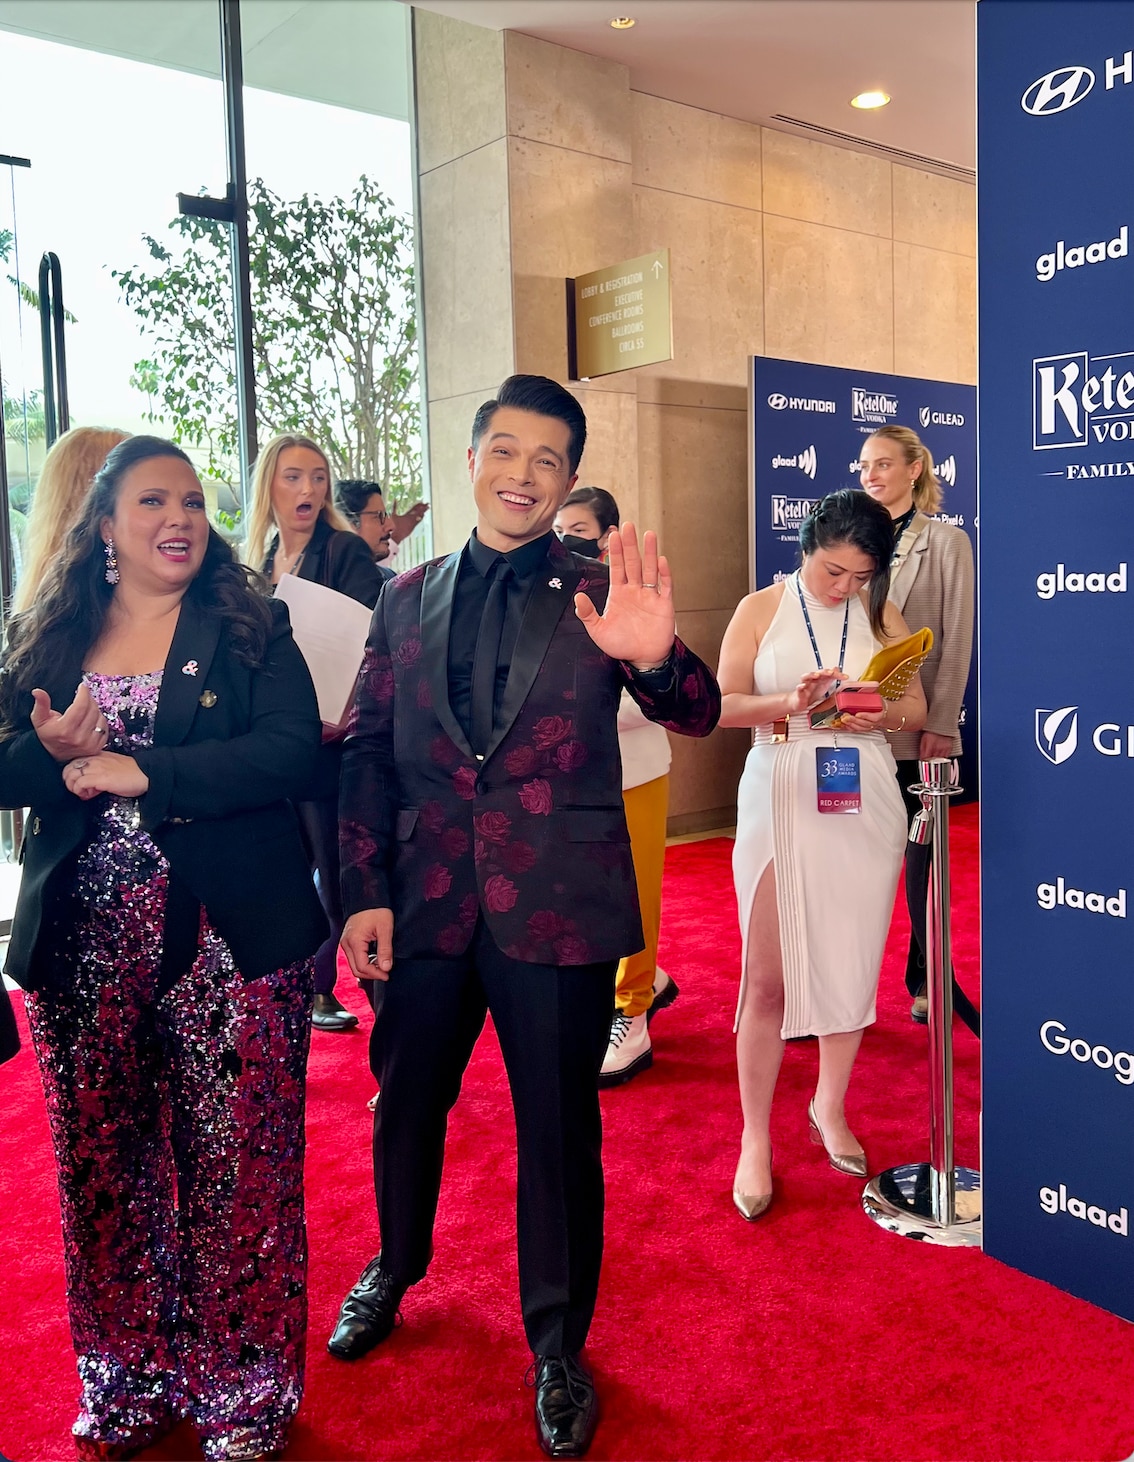 Vincent Rodriguez III at the GLAAD Awards.